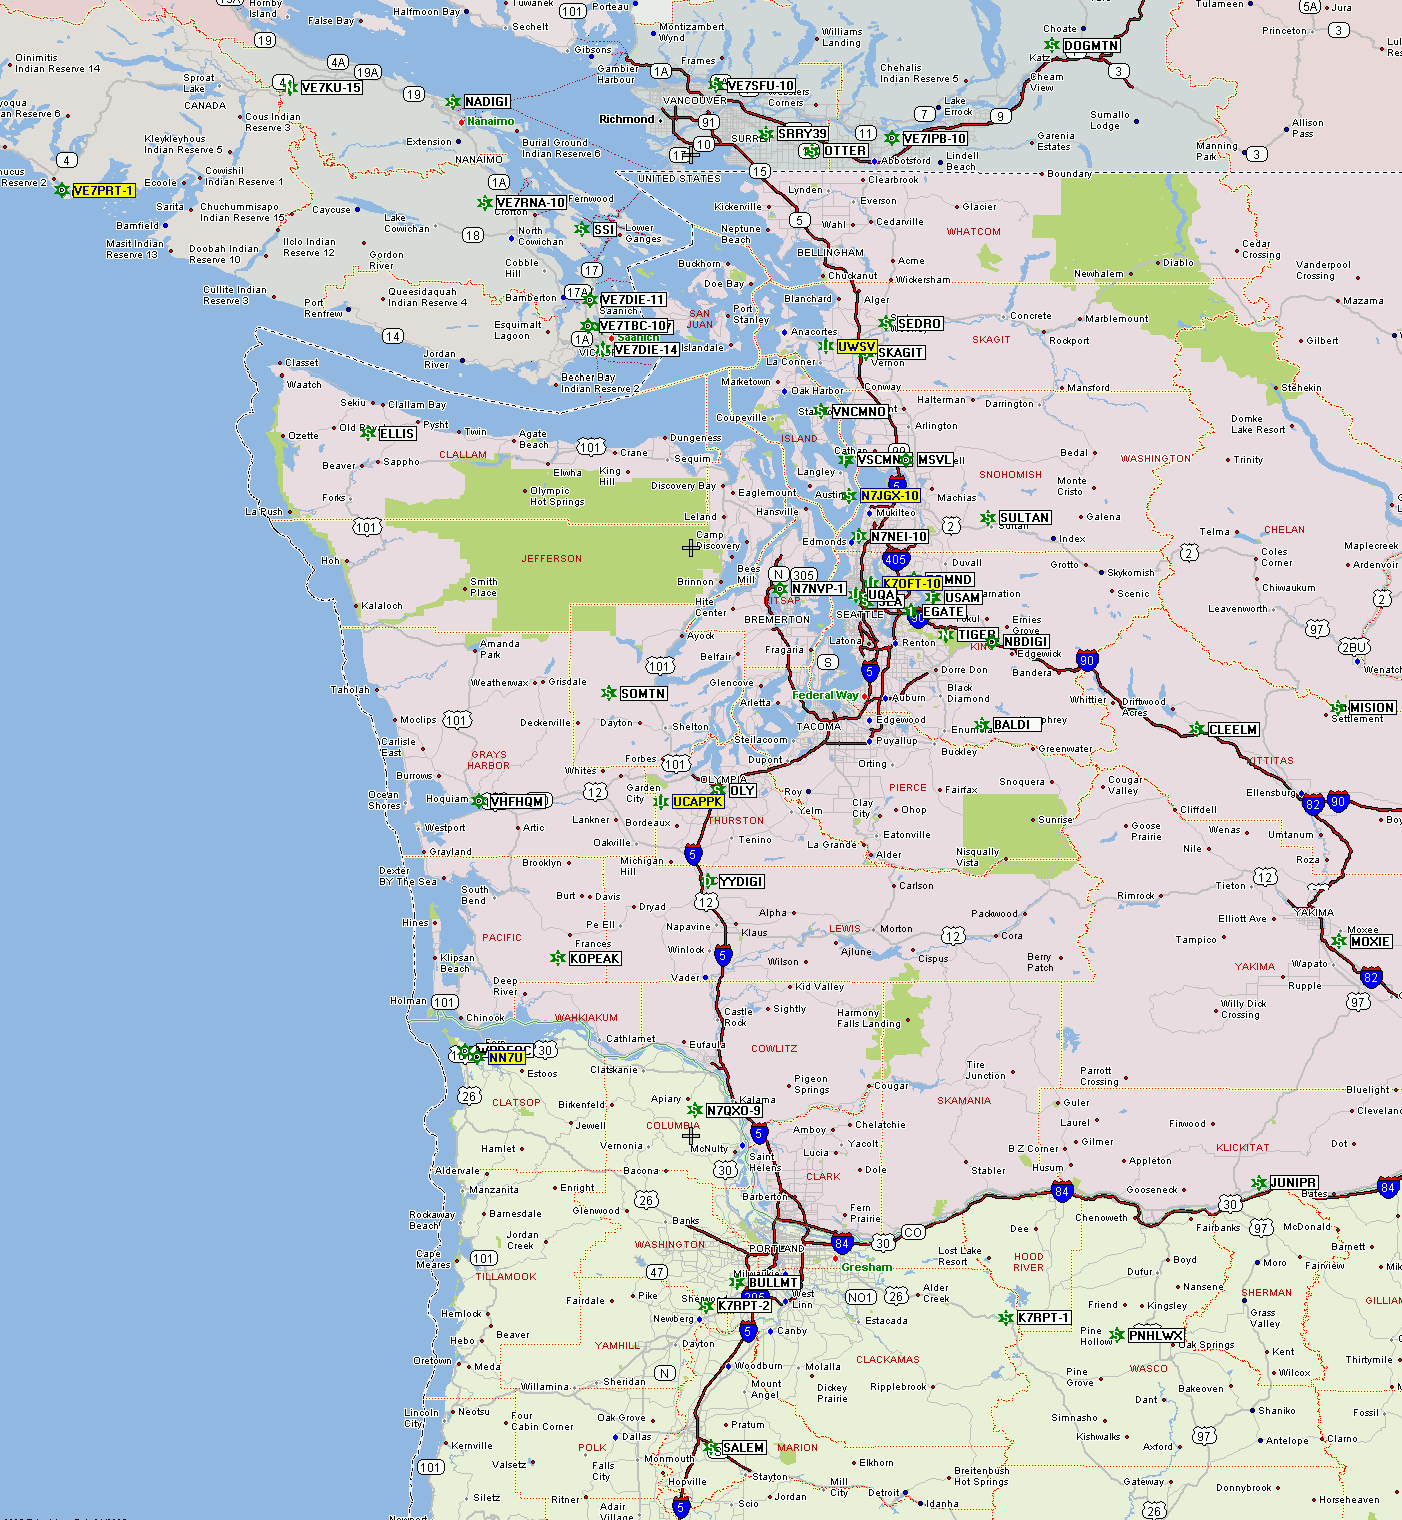 Map of APRS Digipeaters in US/Canada Pacific NorthWest